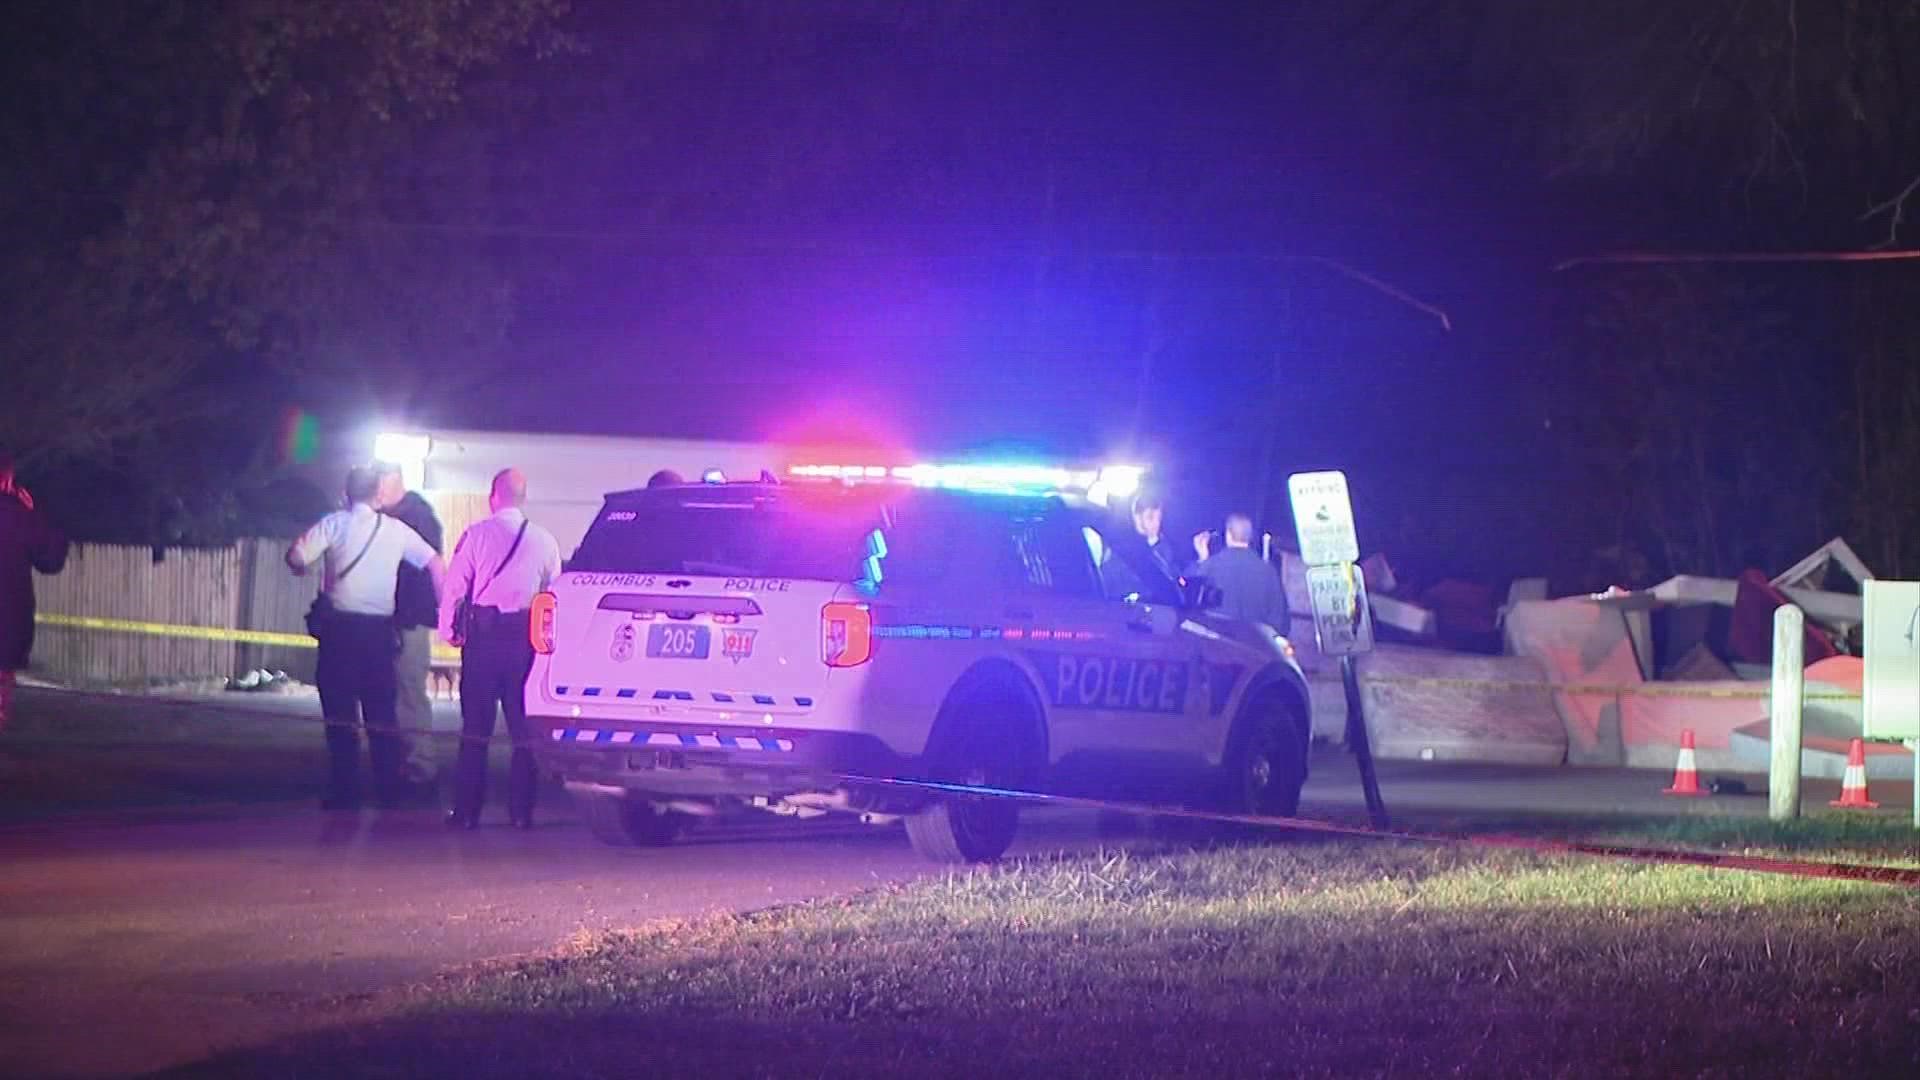 Police were called to the intersection of Brookway Road and Allendale Drive around 7:20 p.m.